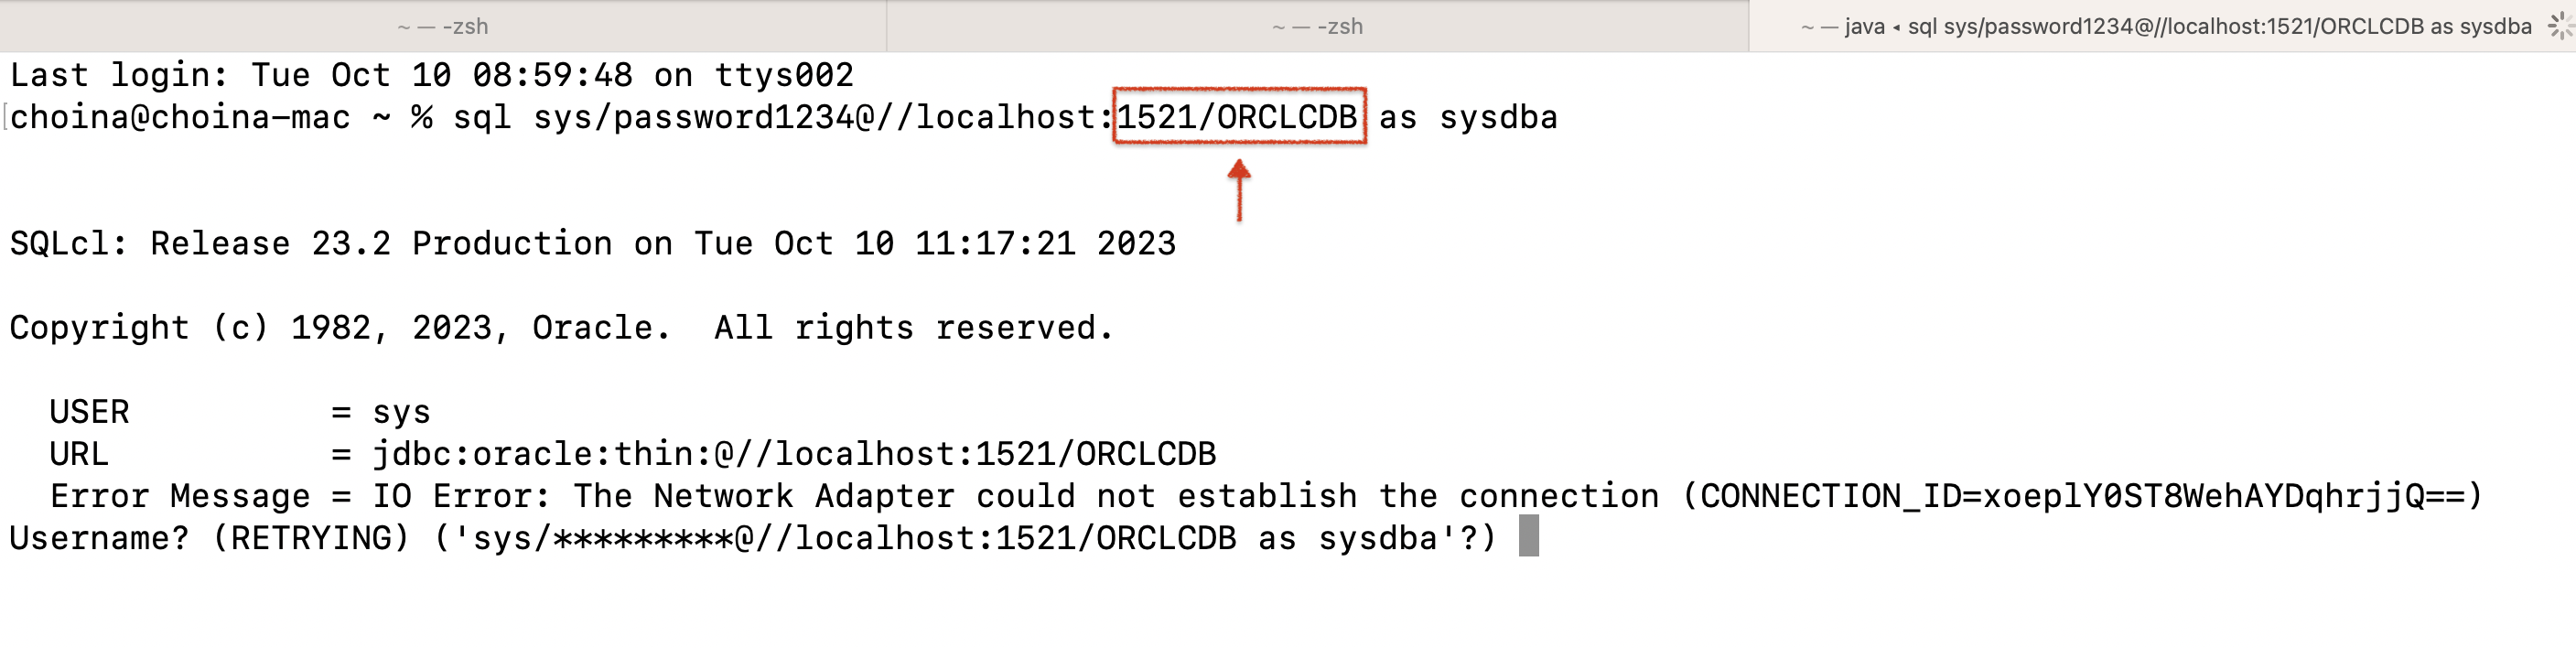 login-failure-to-cdb-with-port-1521-chris-hoina-senior-product-manager-oracle-rest-data-services-database-tools